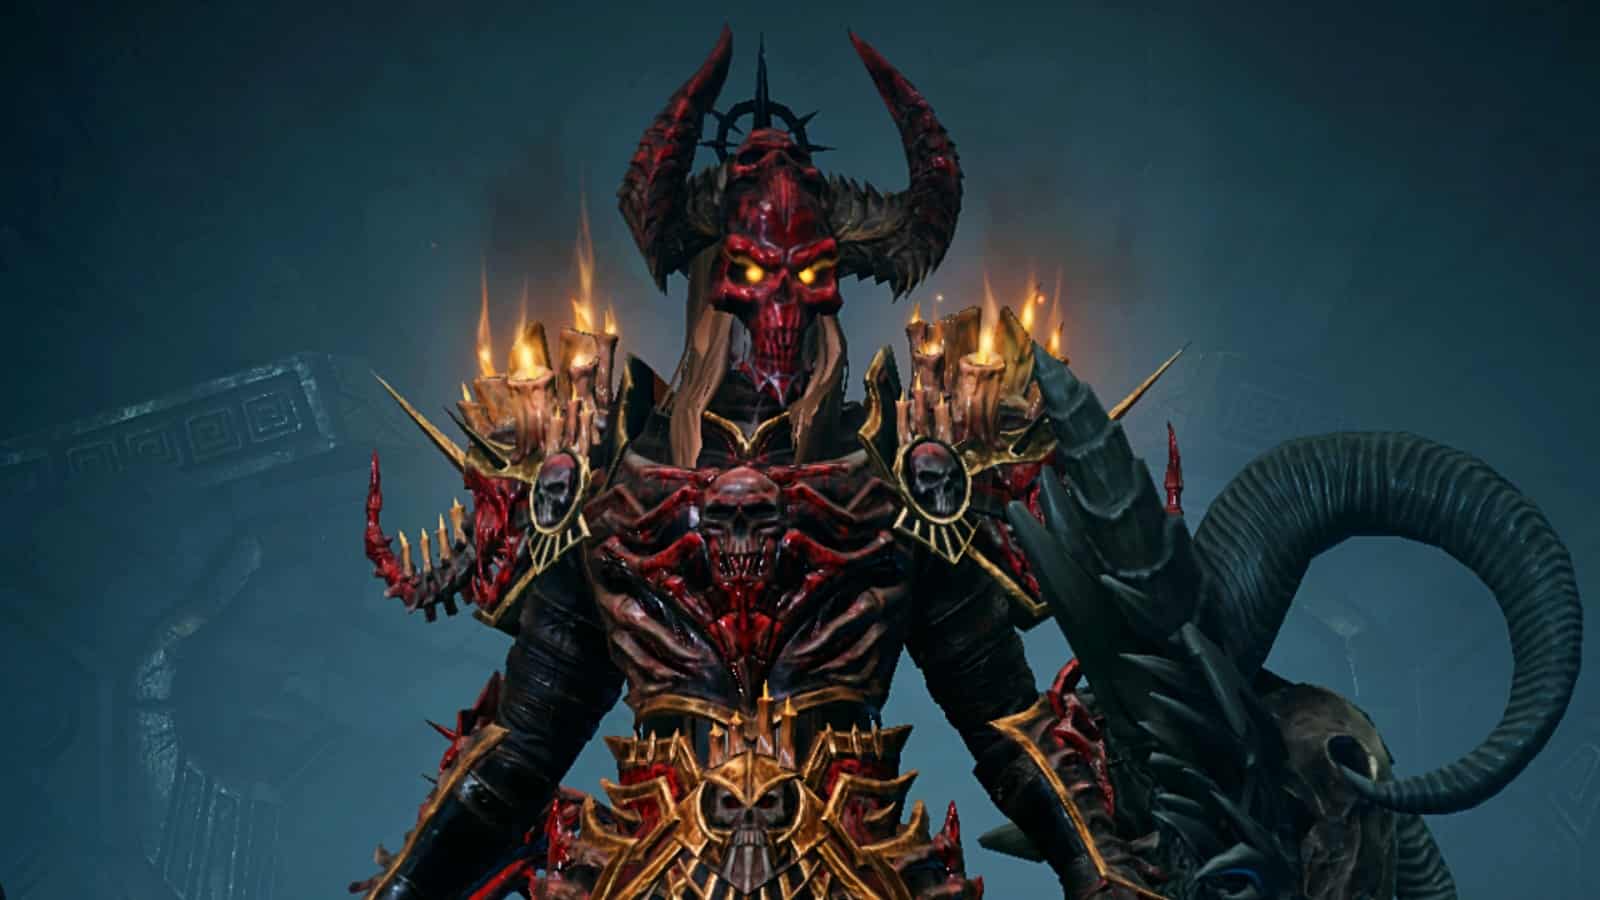 Players review bomb Diablo Immortal due to lootbox and microtransactions,  Metacritic score tanks to 0.7 - GamerBraves